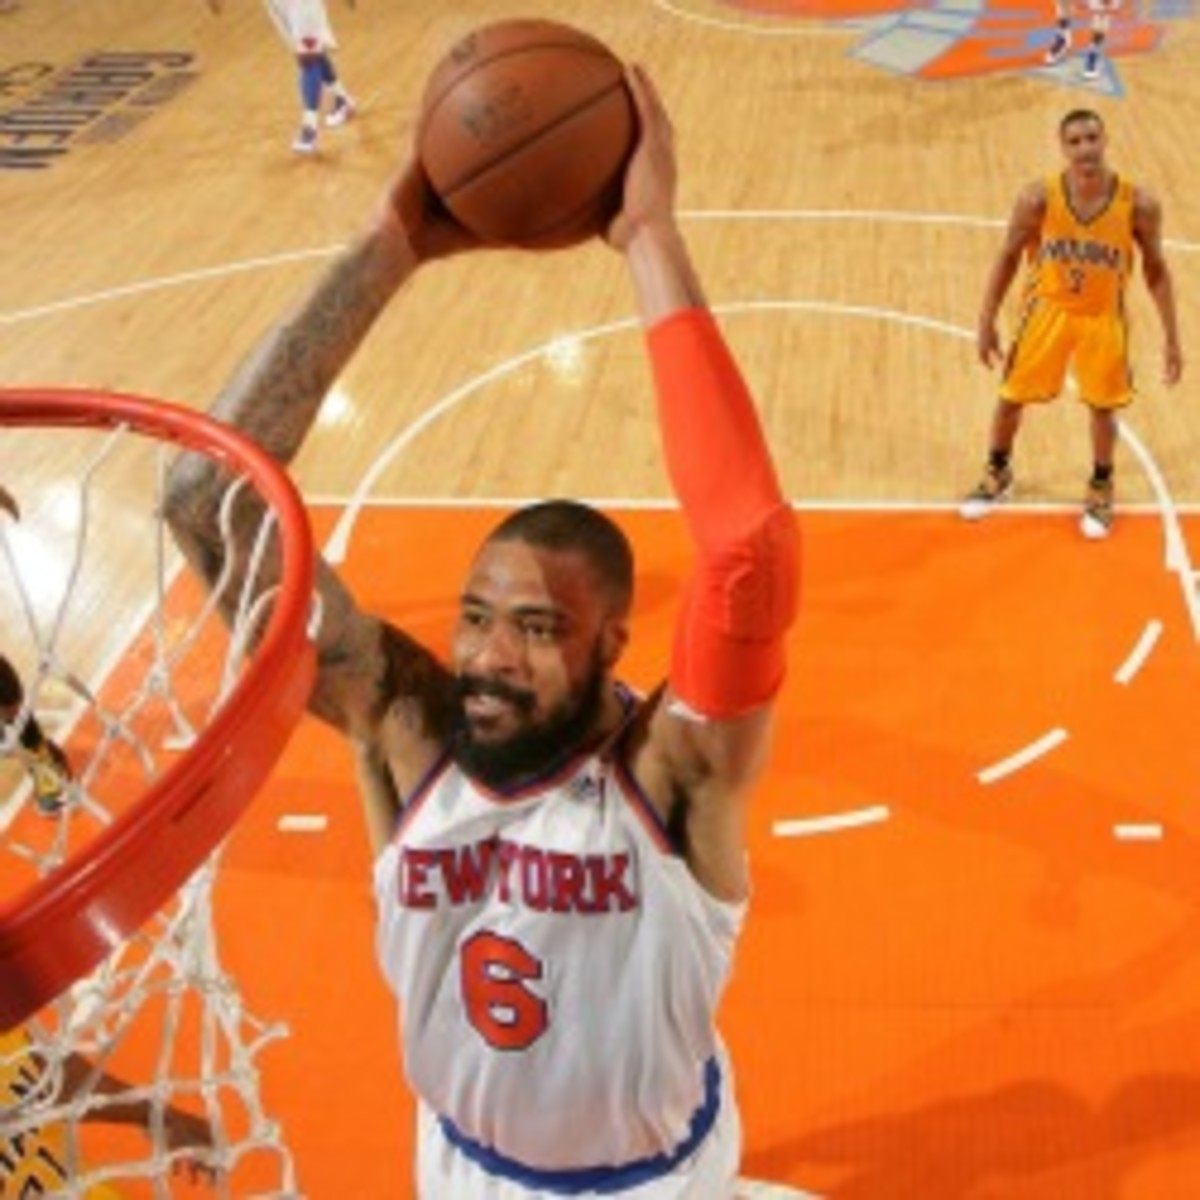 Tyson Chandler criticized the Knicks' offense for playing as individuals, not as a team. (Nathaniel S. Butler/Getty Images)